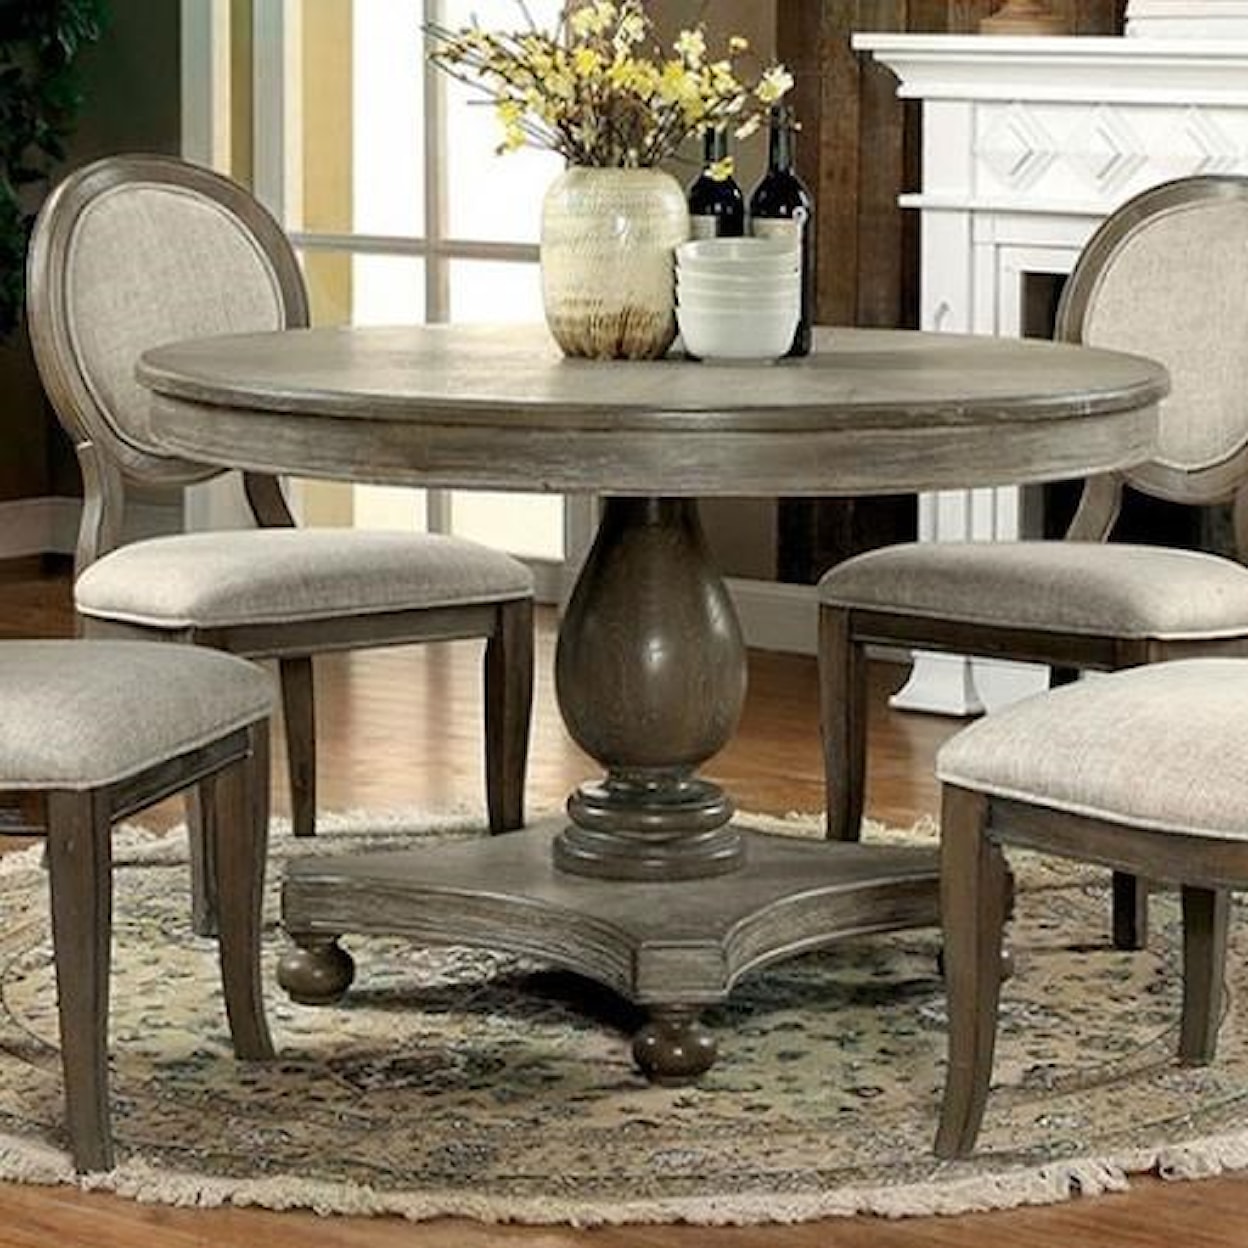 Furniture of America Kathryn Round Dining Table